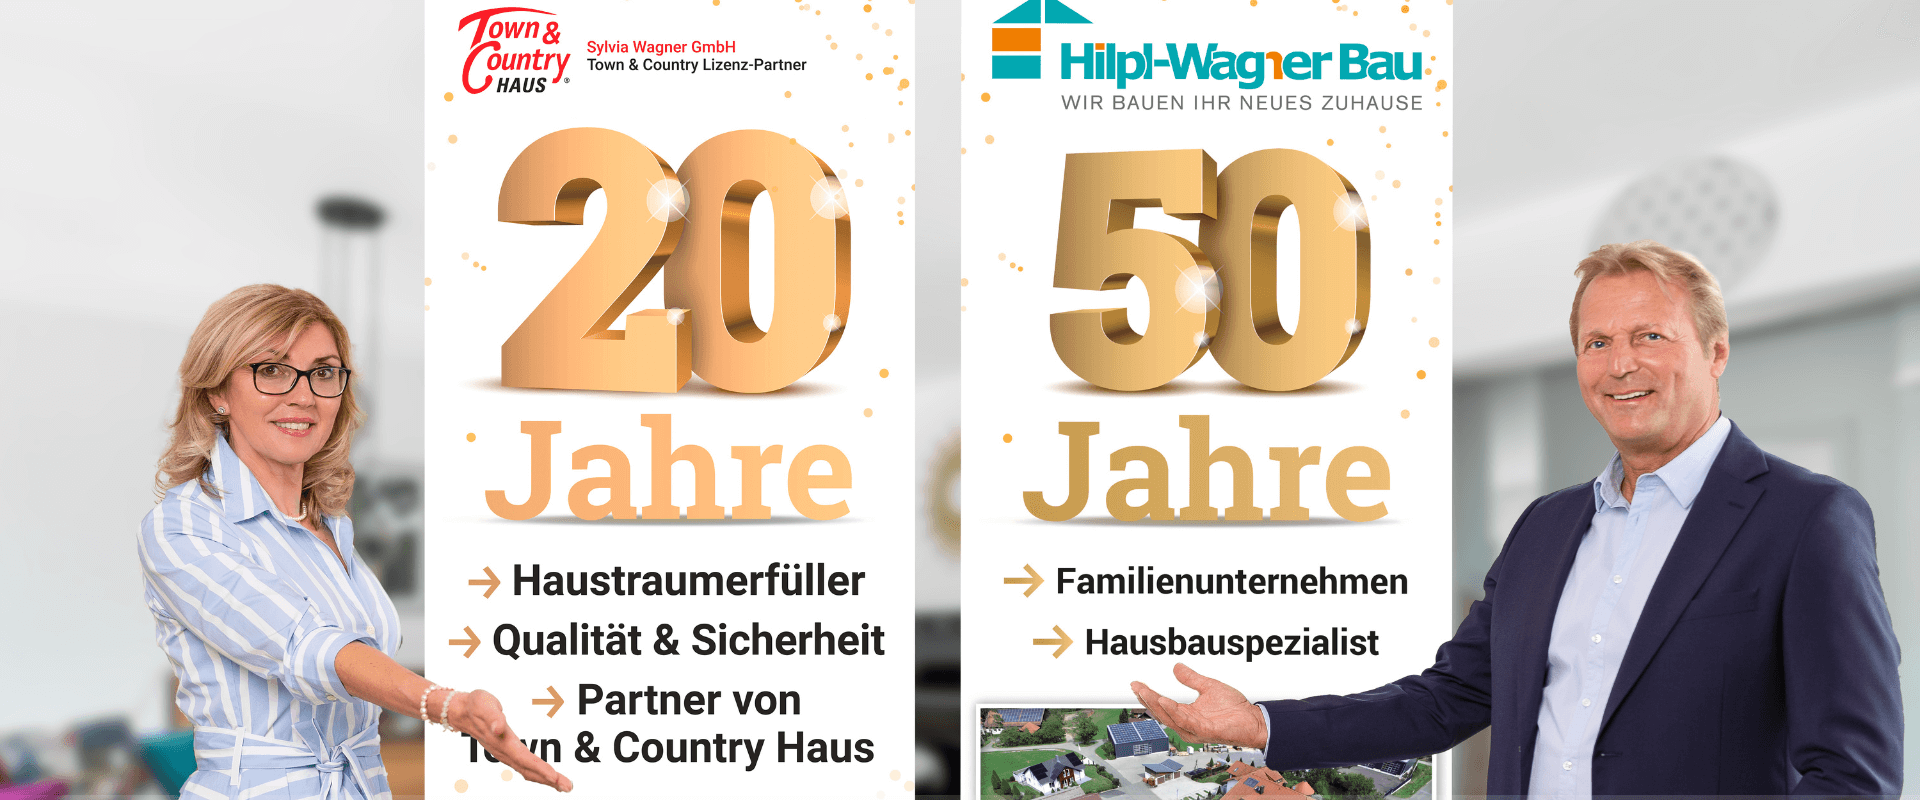 Sylvia Wagner-Maximilian Wagner-50 Jahre Hilpl Wagner Bau-20 Jahre Town Country